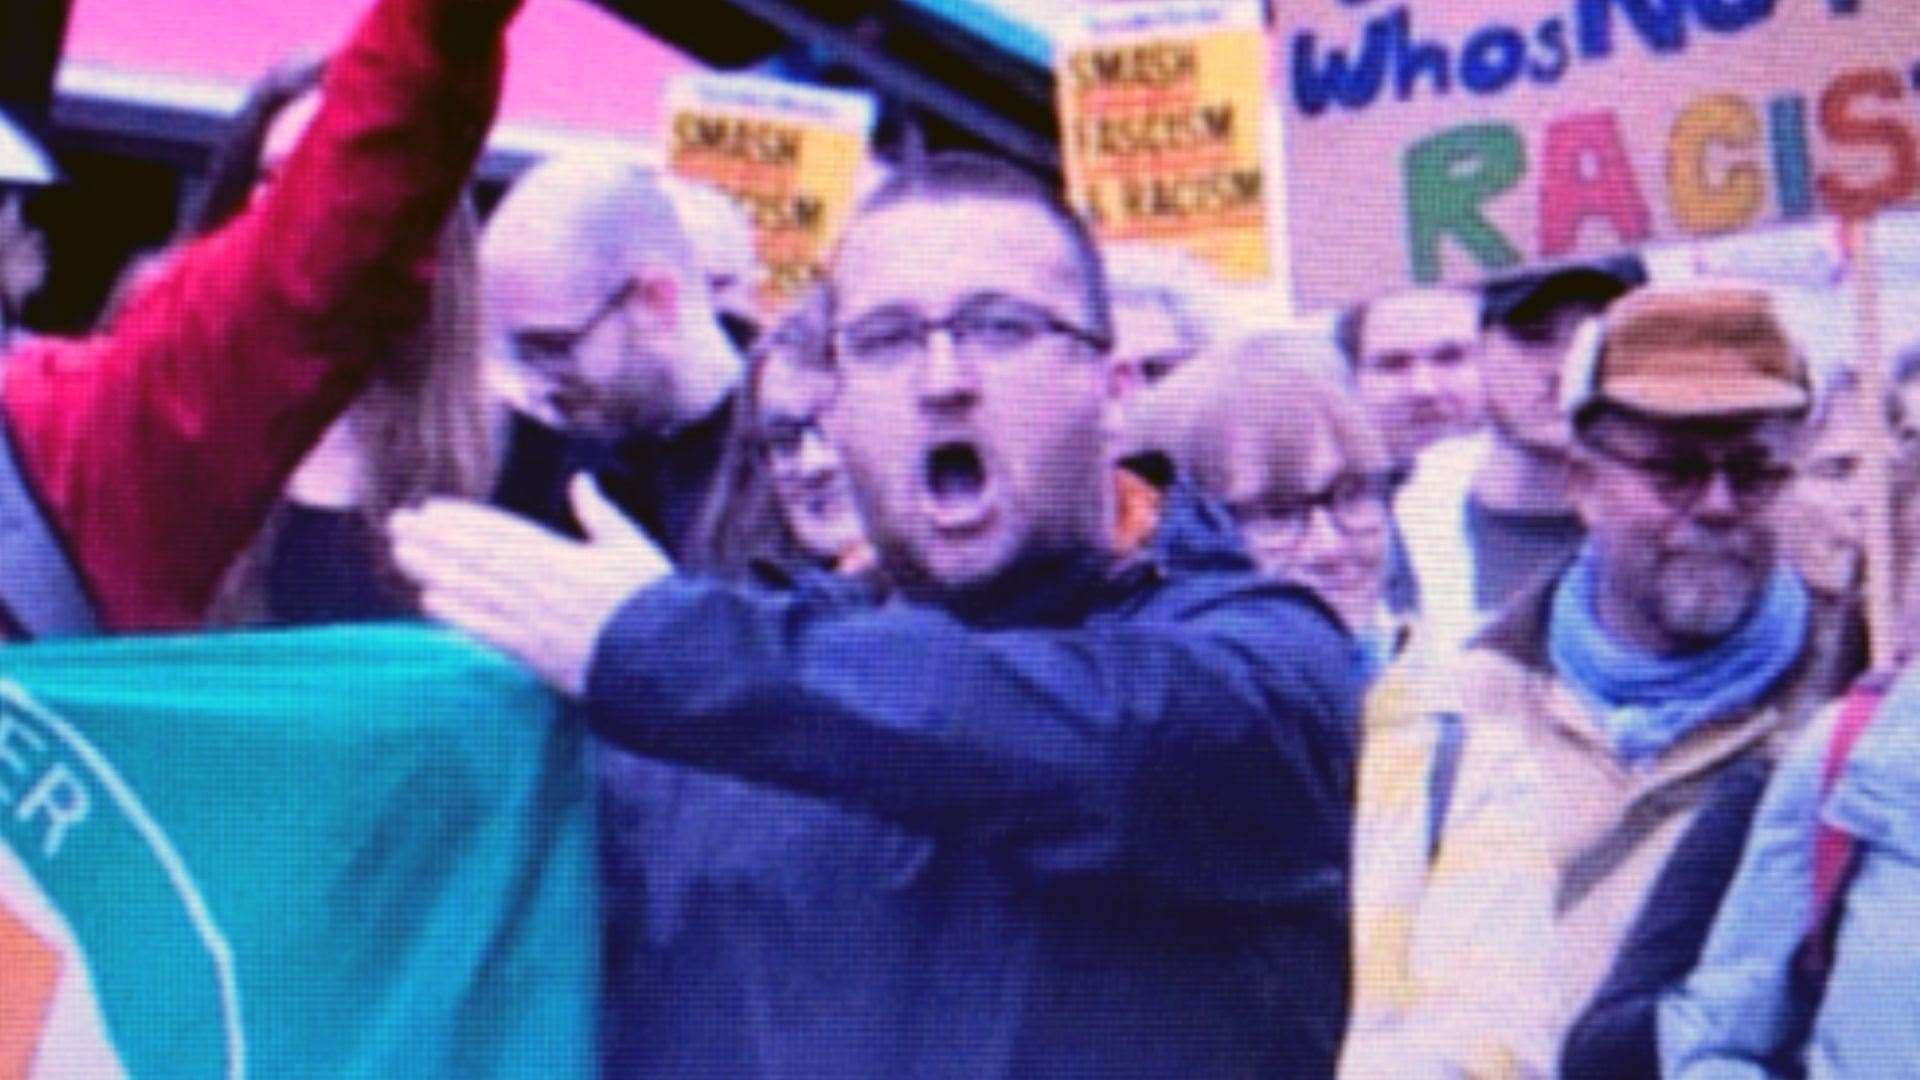 Mr Burman was part of the anti-fascist protesters in 2016